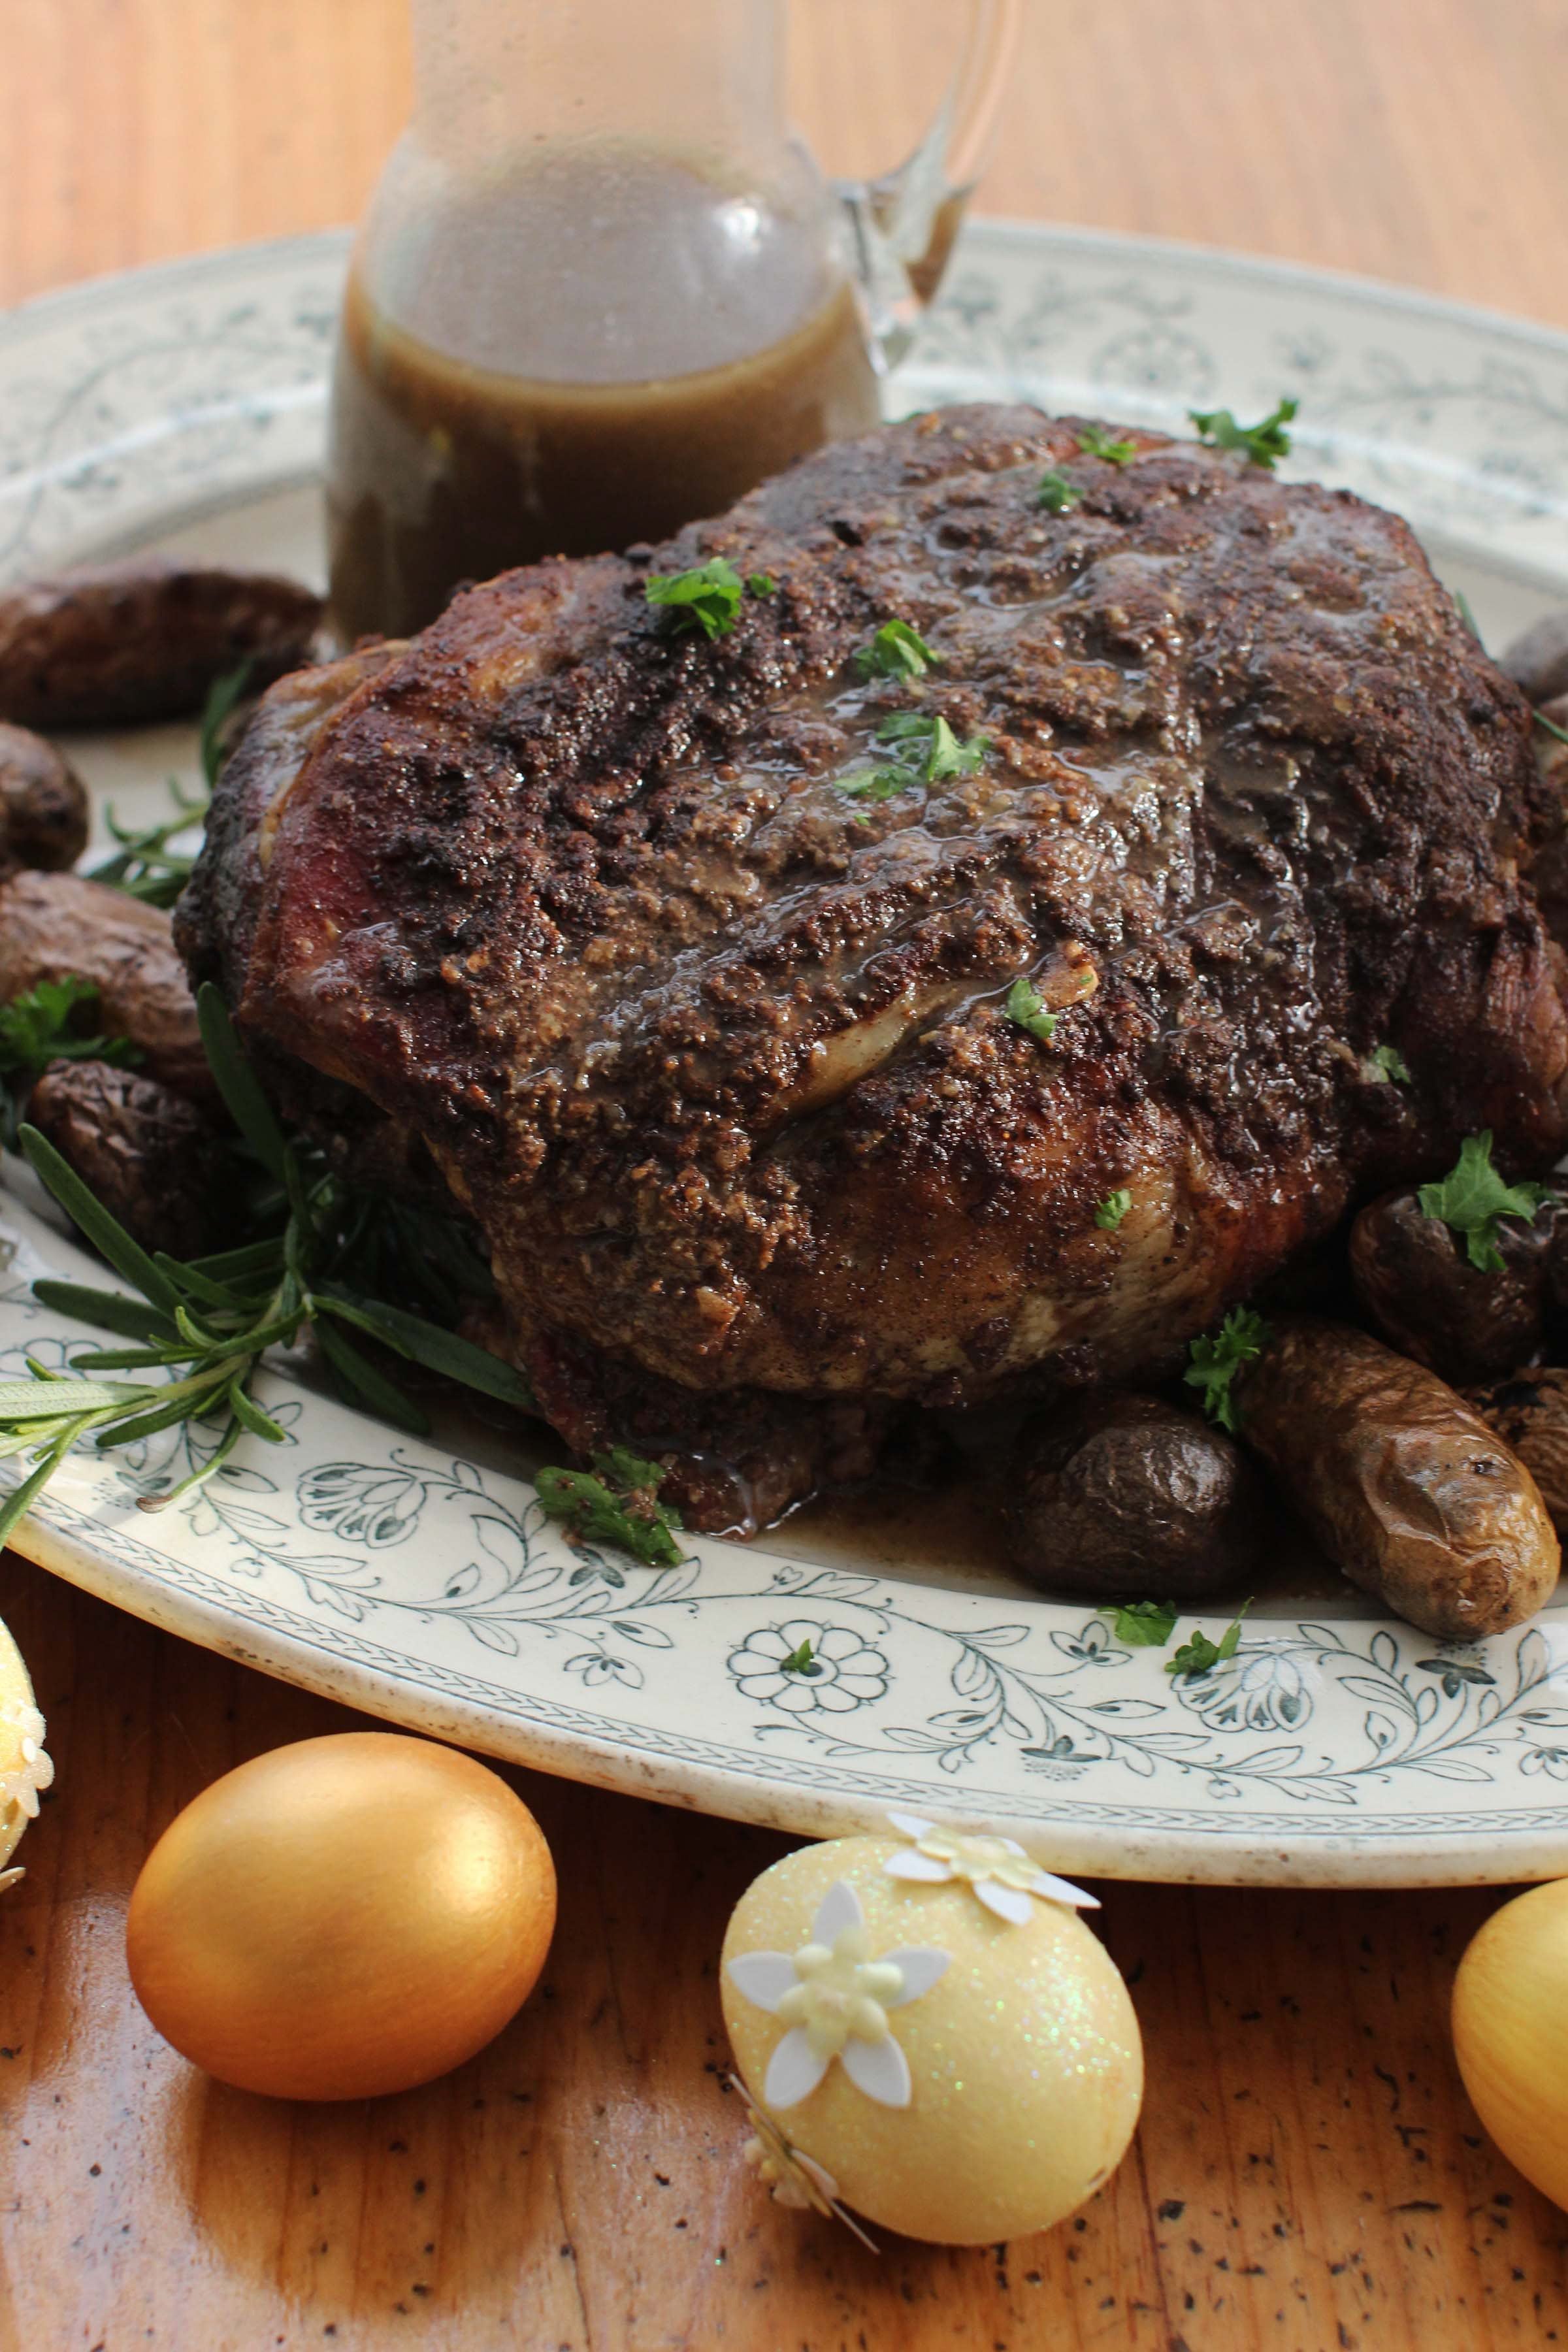 This Feb. 2016 photo shows Indian Spiced Easter Lamb in Concord, N.H.   This recipe is a beautiful alternative to a traditional Easter Sunday roast lamb.  It?s best served with fresh asparagus and peas, some pan-fried potatoes dressed in cumin, salt and butter, and yogurt with fresh mint and grated cucumber.